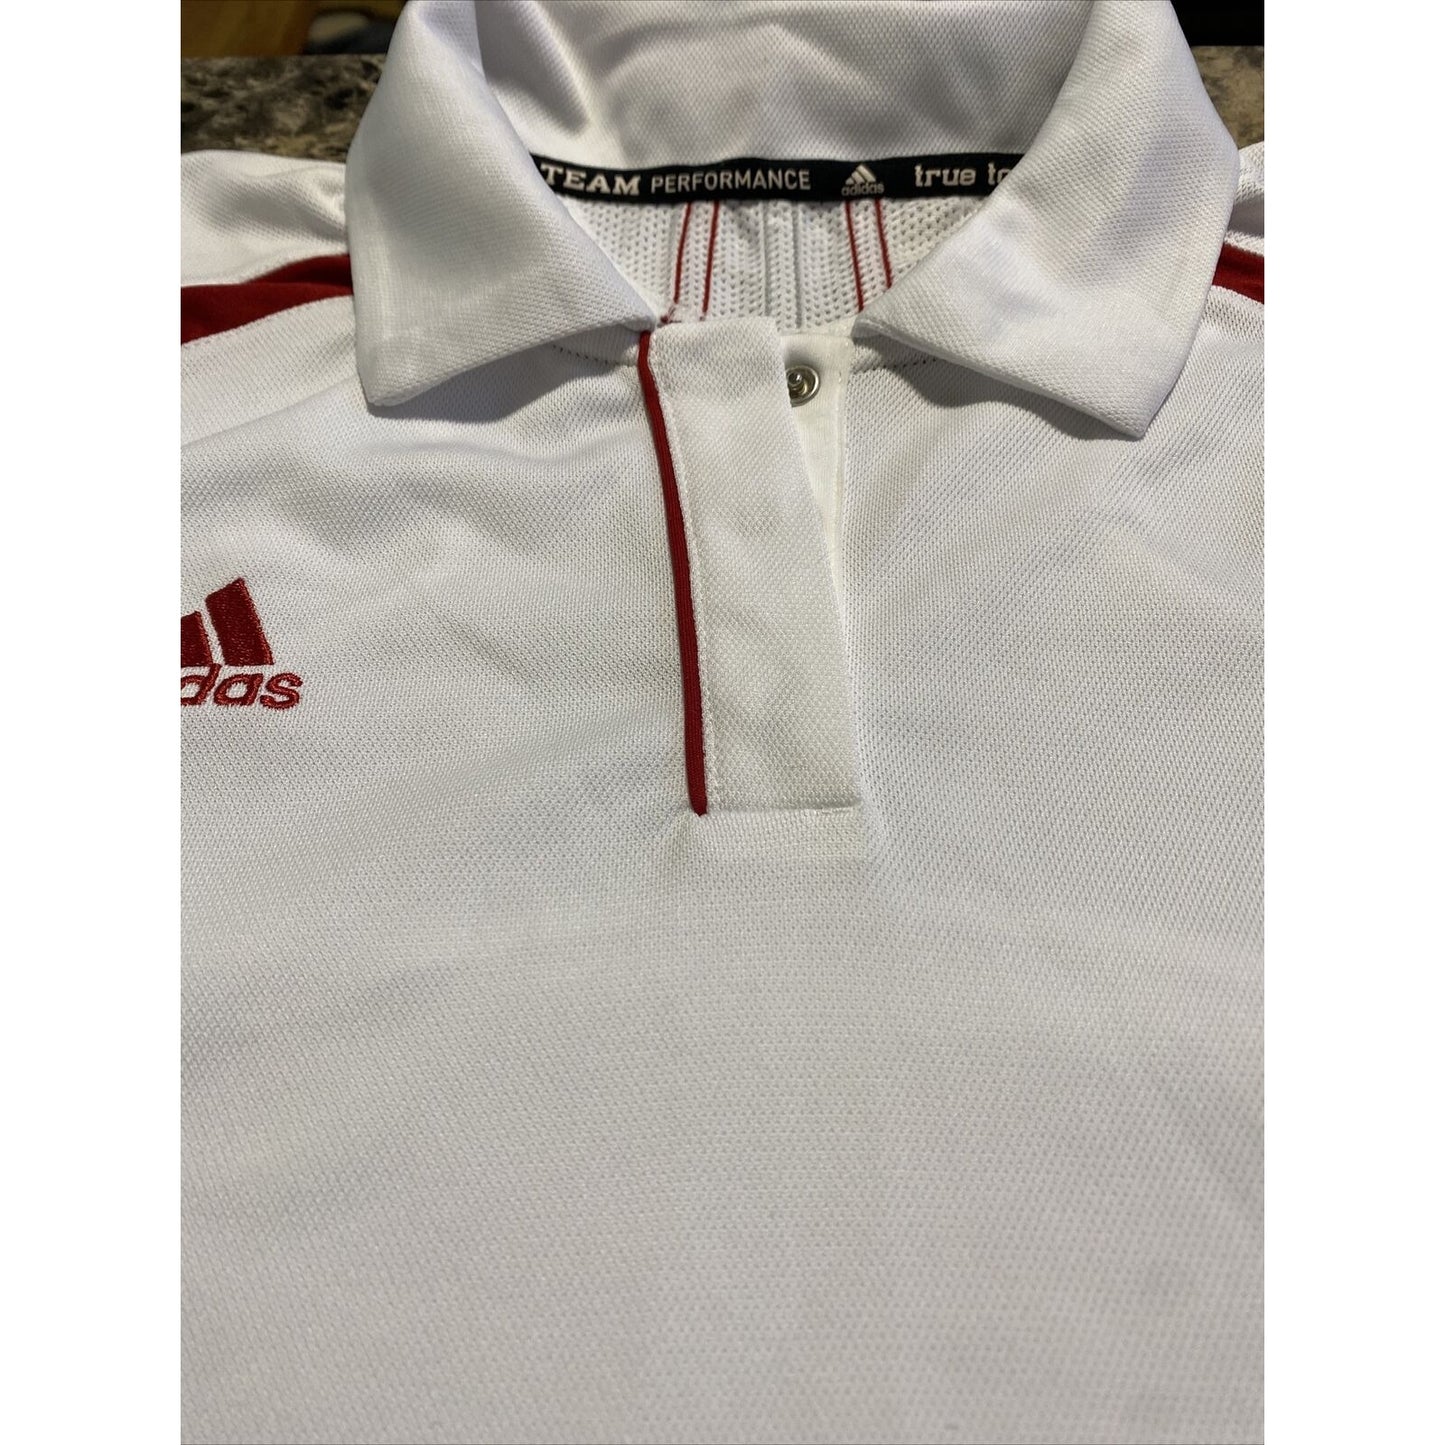 Adidas Team Performance Women’s Large White Red Athletic Climacool Polo Shirt